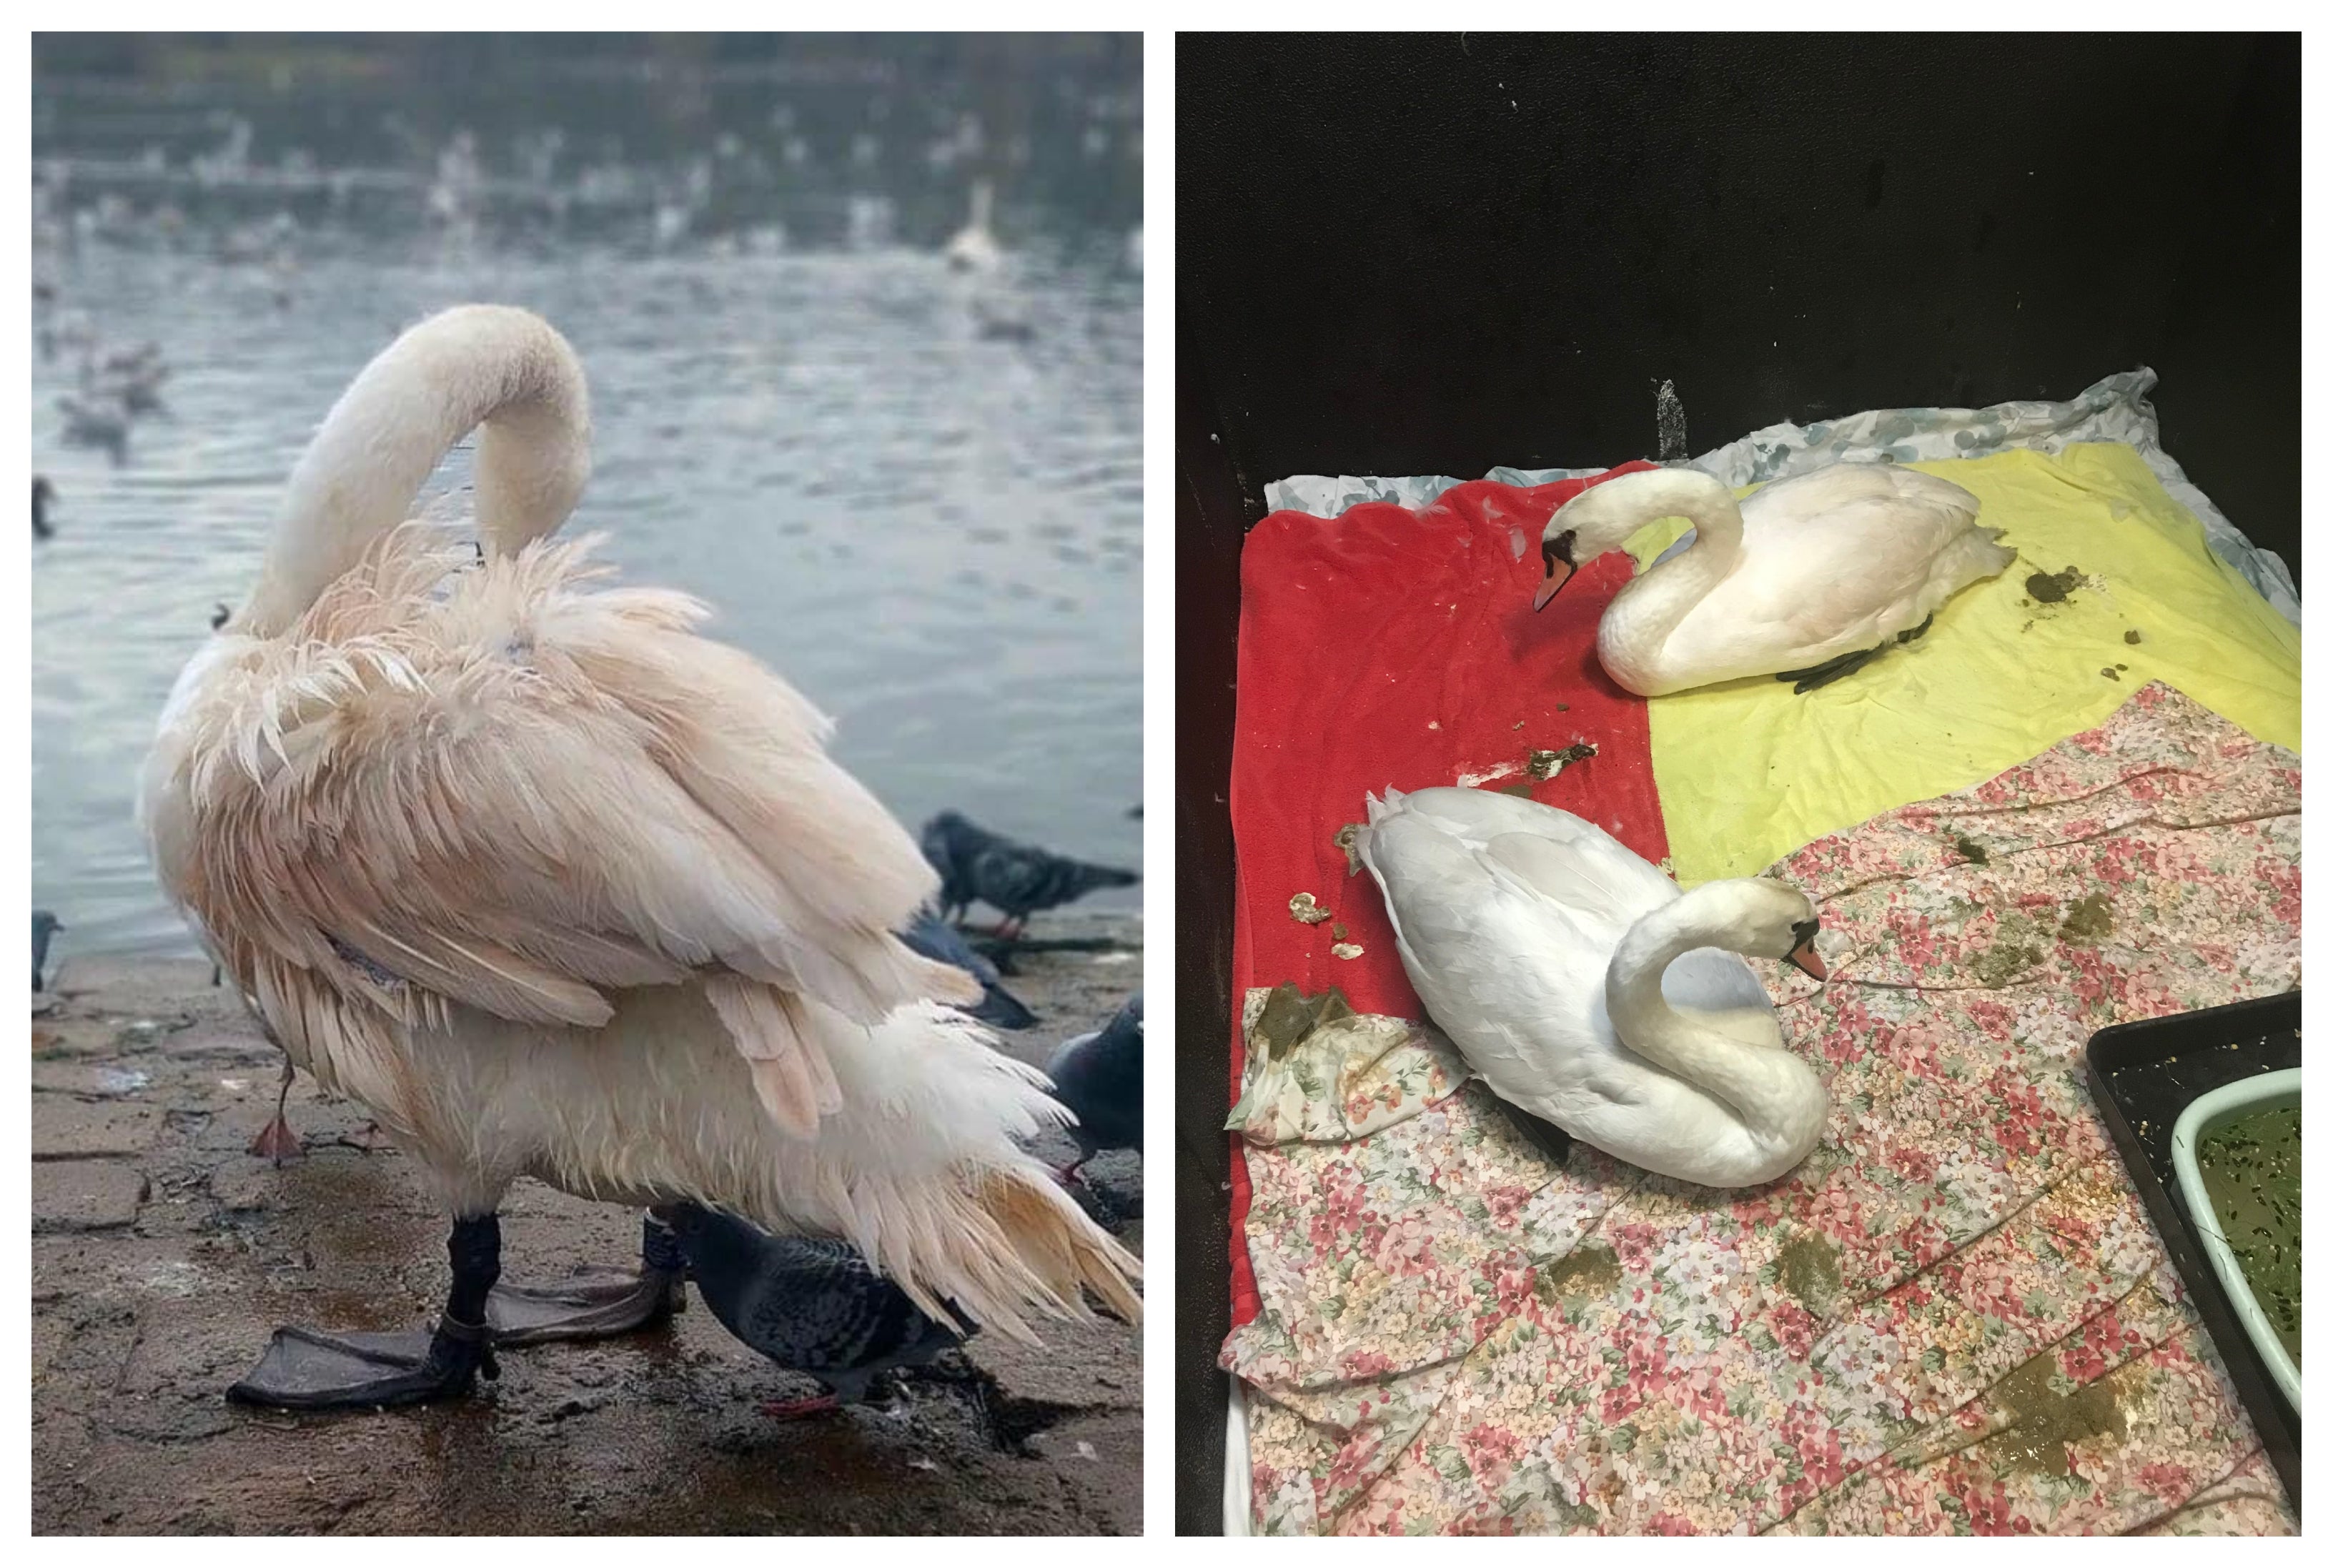 Not so pretty in pink: Swans are being transformed by their diet